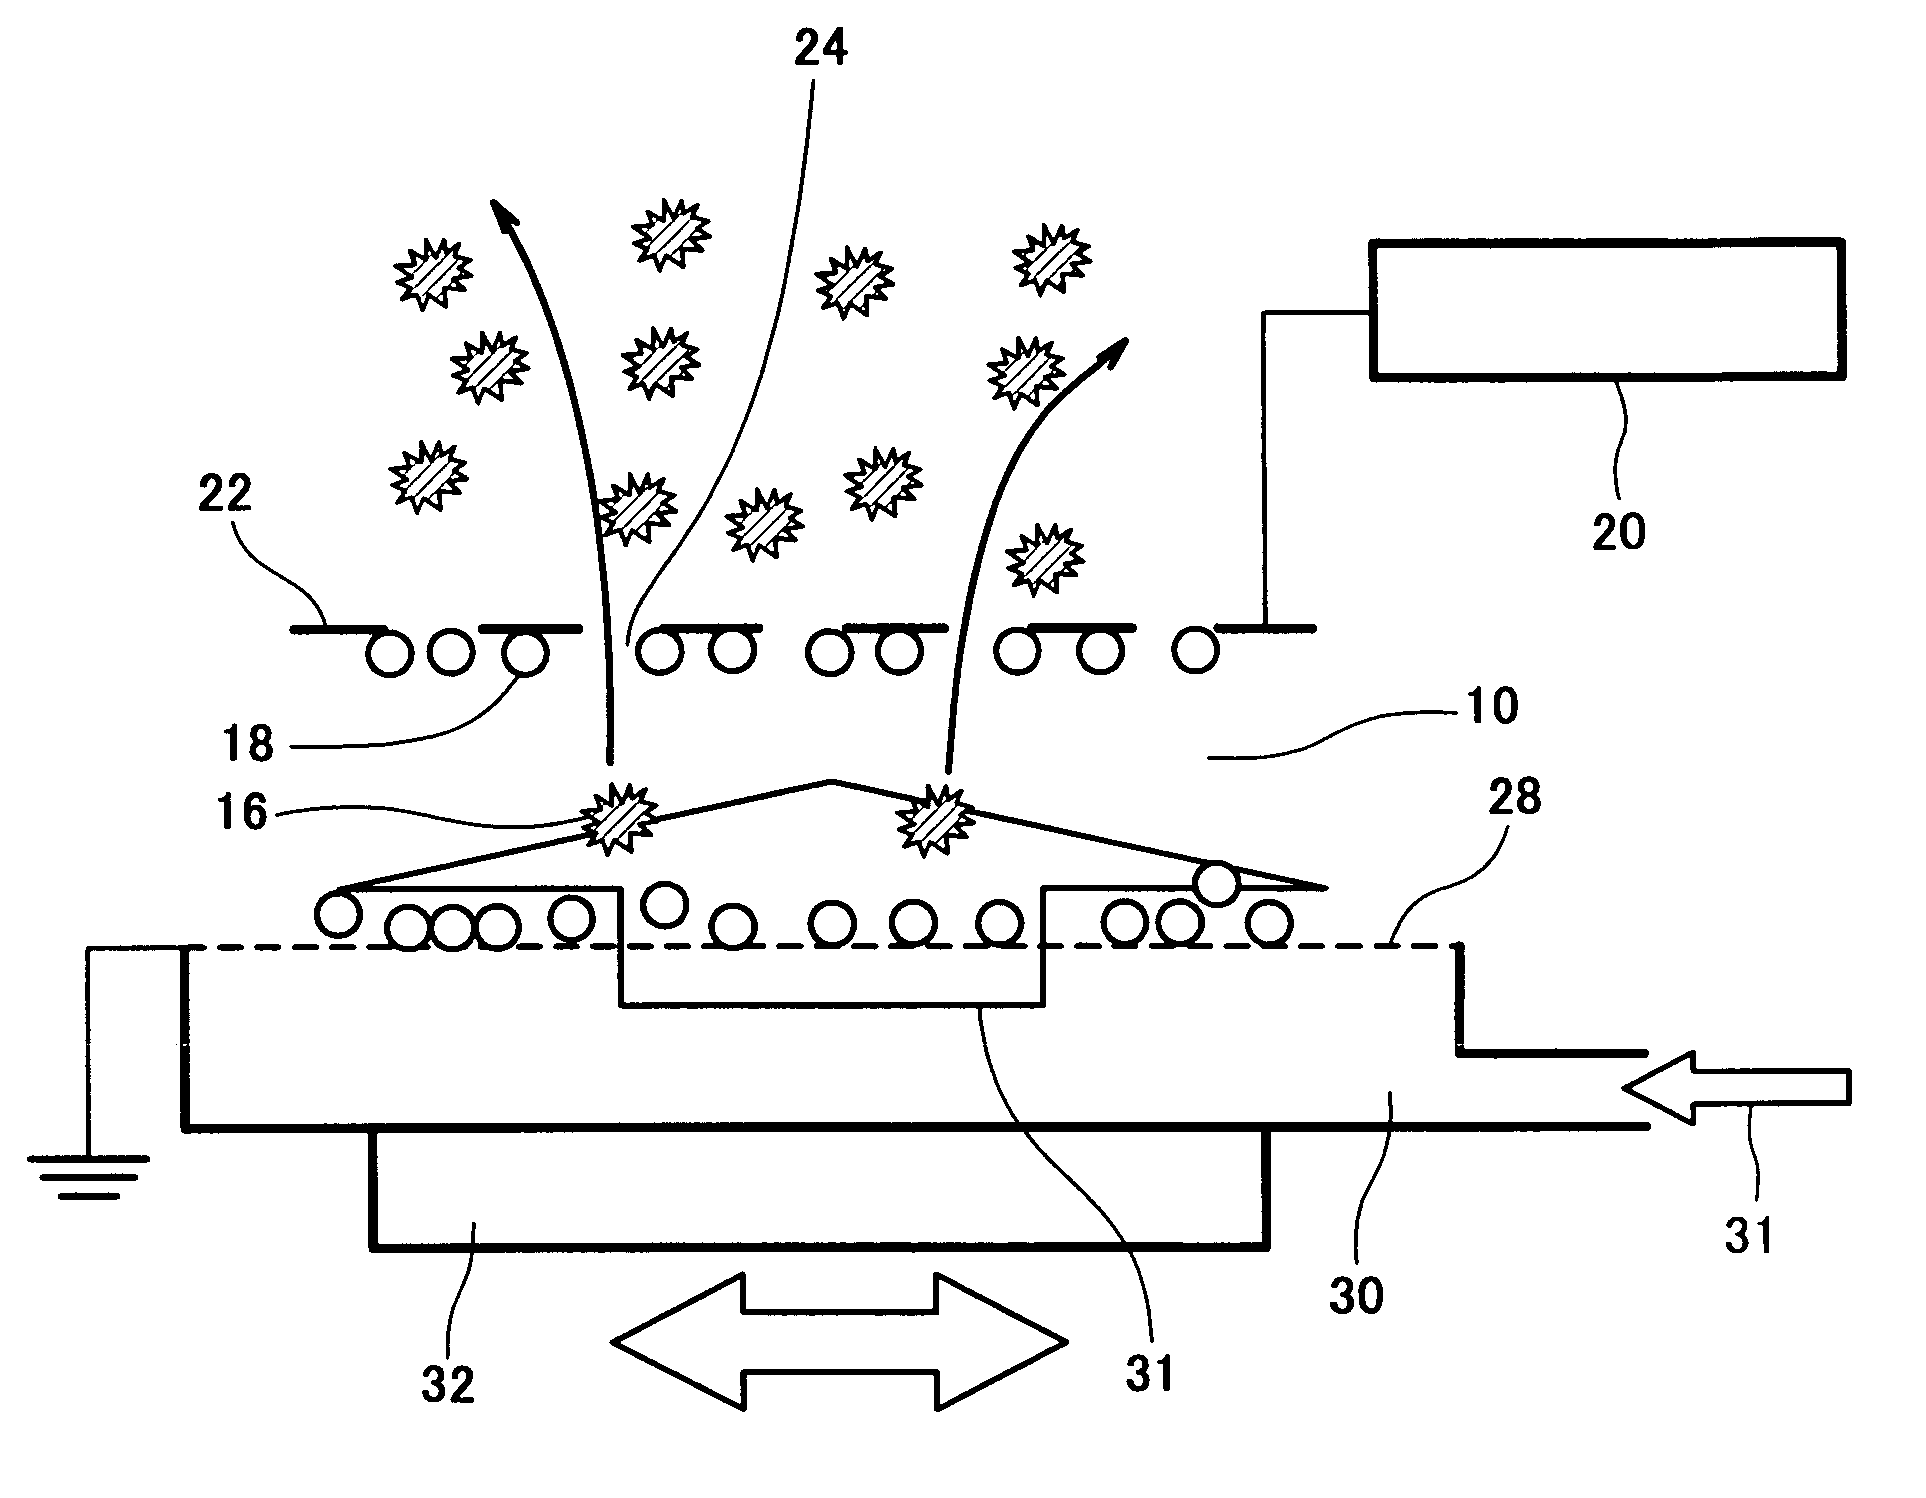 Method for electrostatically separating particles, apparatus for electrostatically separating particles, and processing system